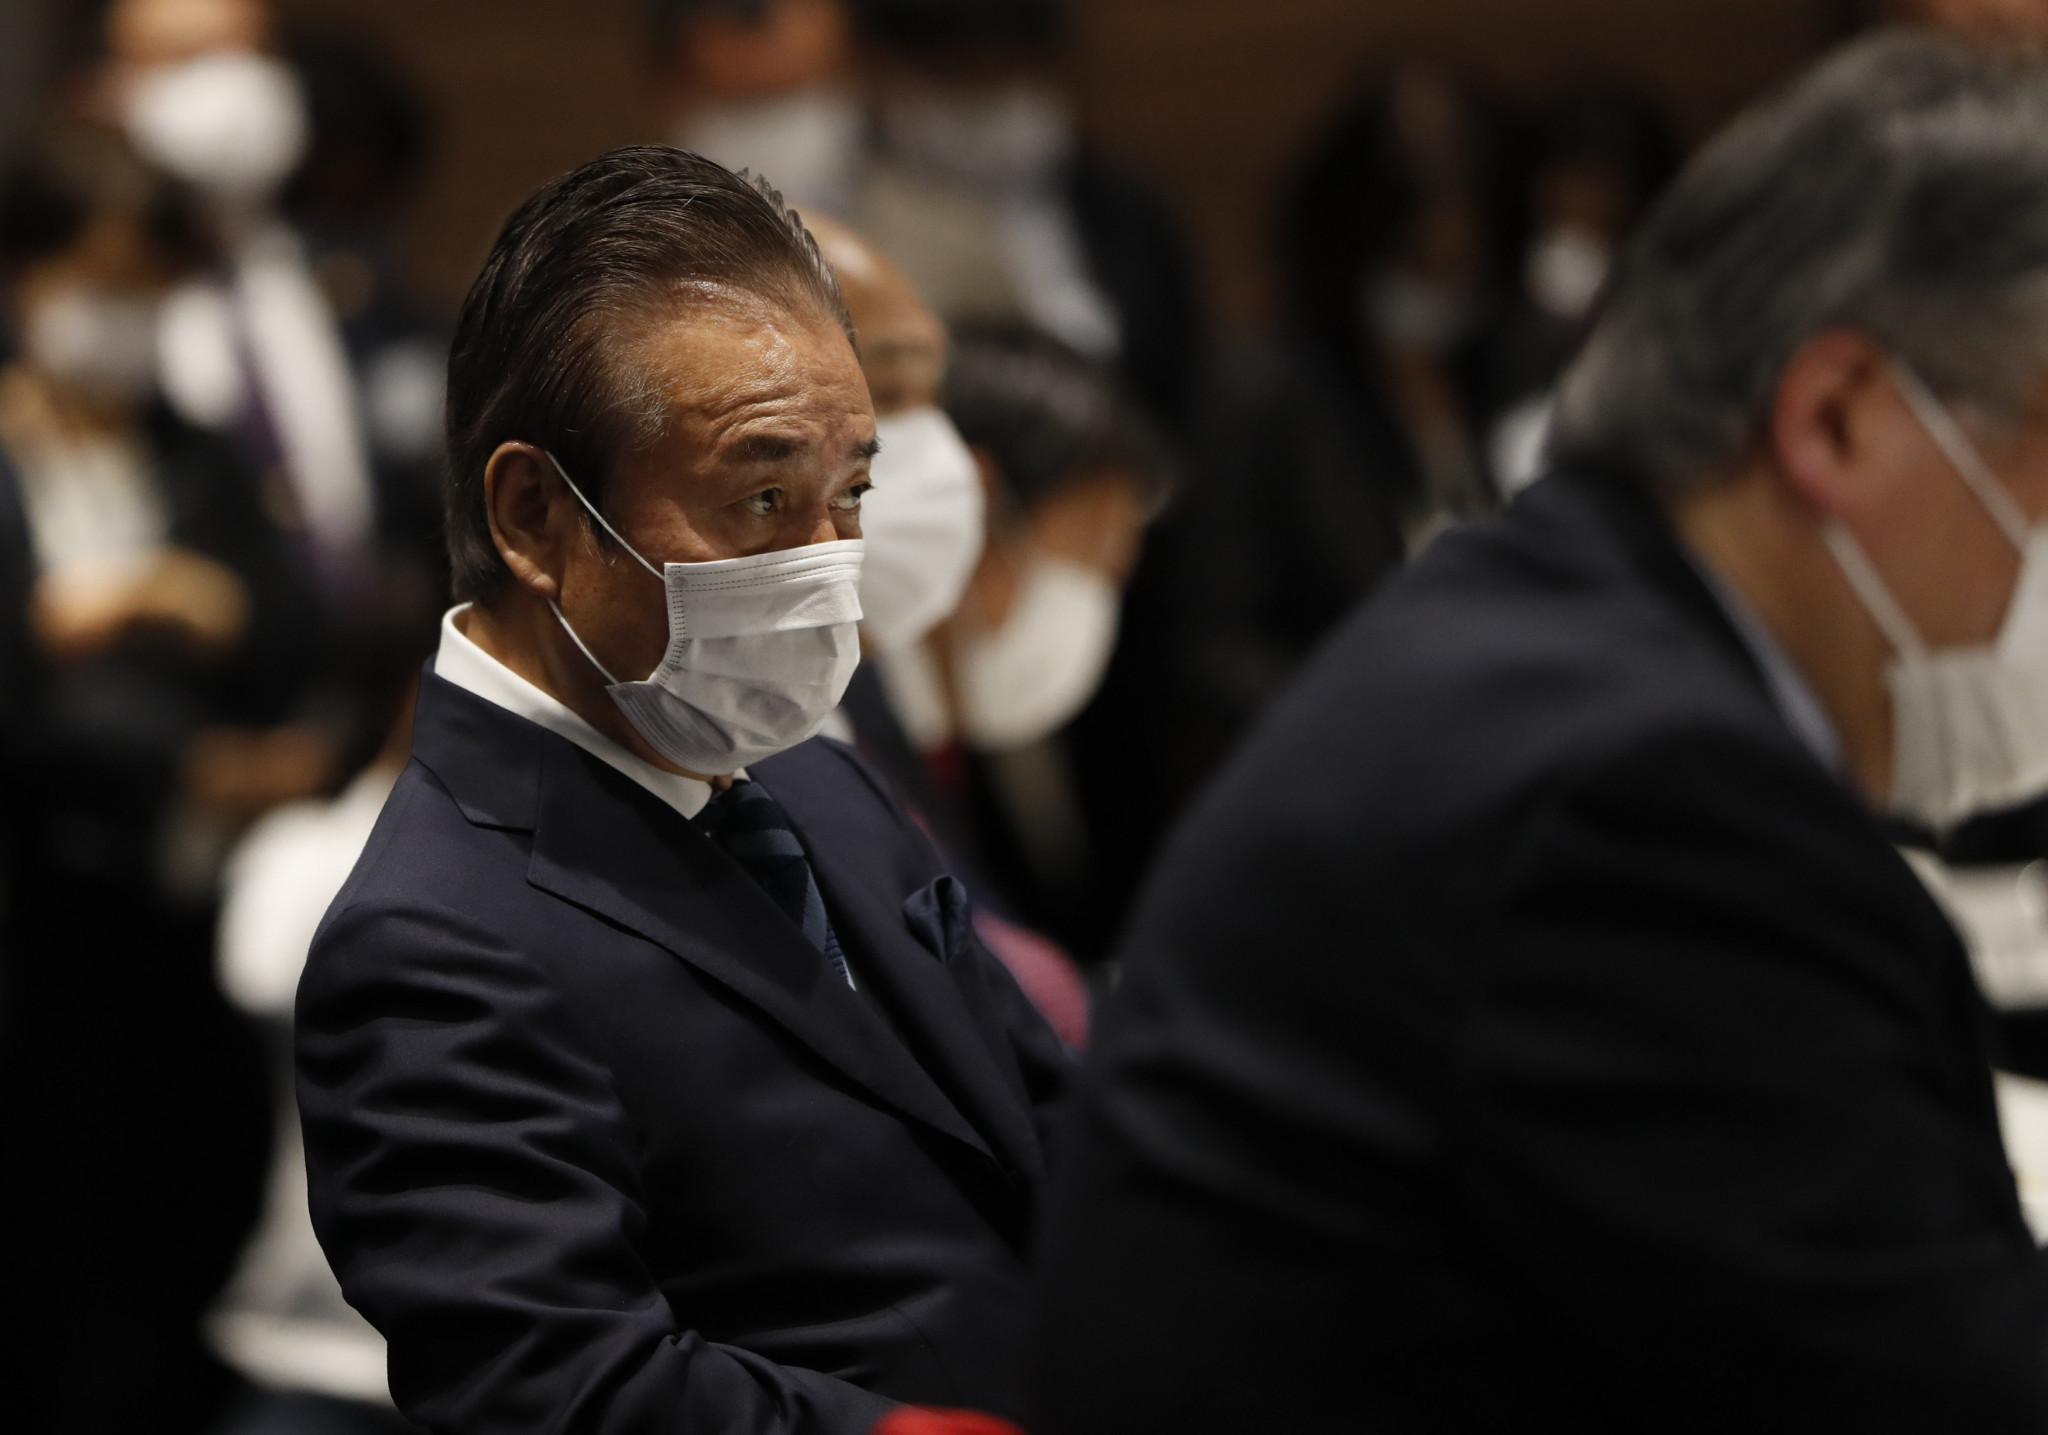 Advertising firm Daiko latest suspect in Tokyo 2020 bribery scandal  